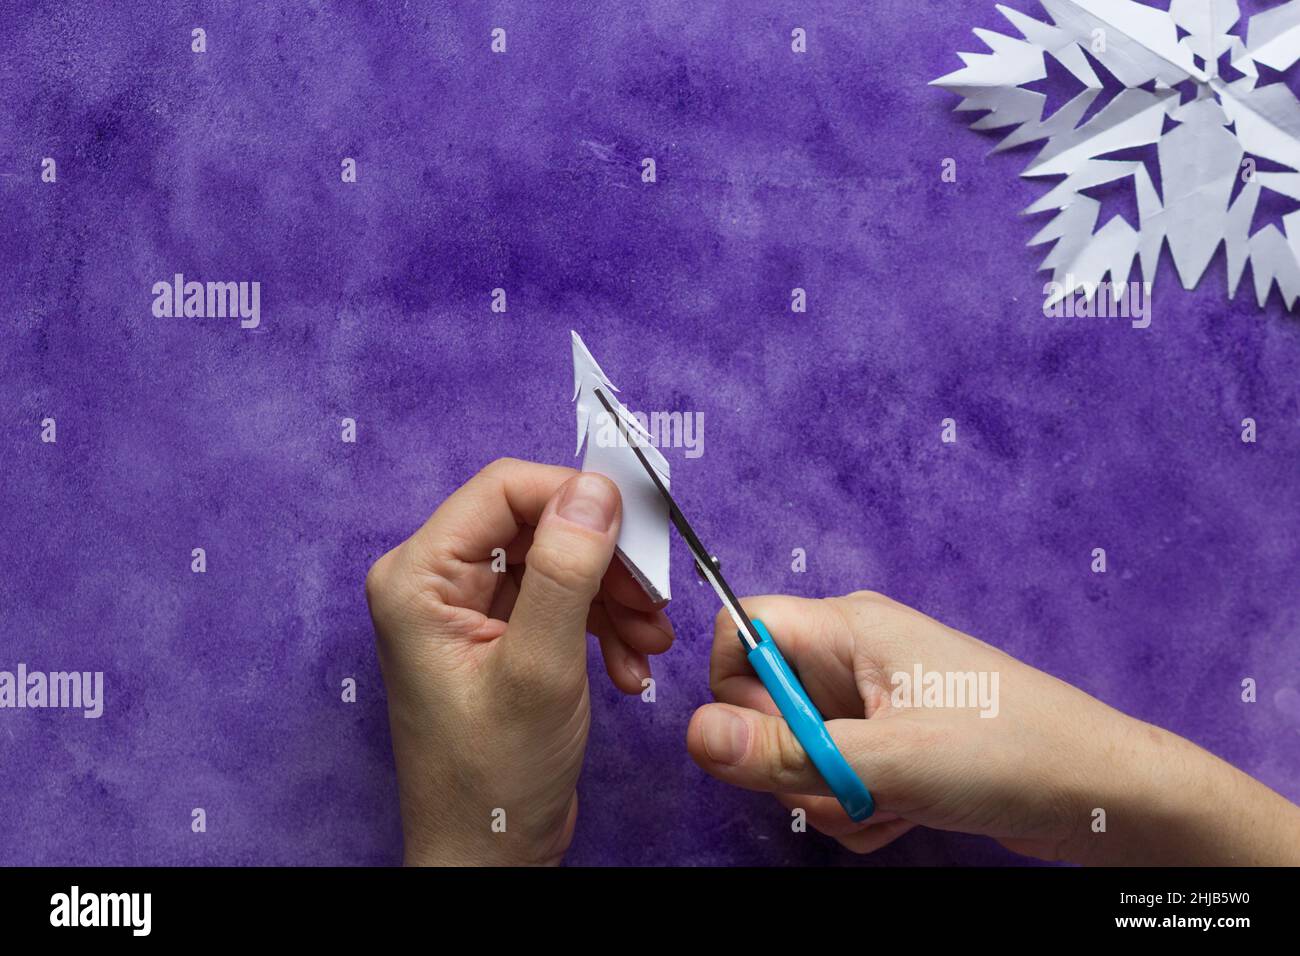 Woman hands cutting away shapes from the edges of the paper to shape snowflake pattern on violet surface Stock Photo